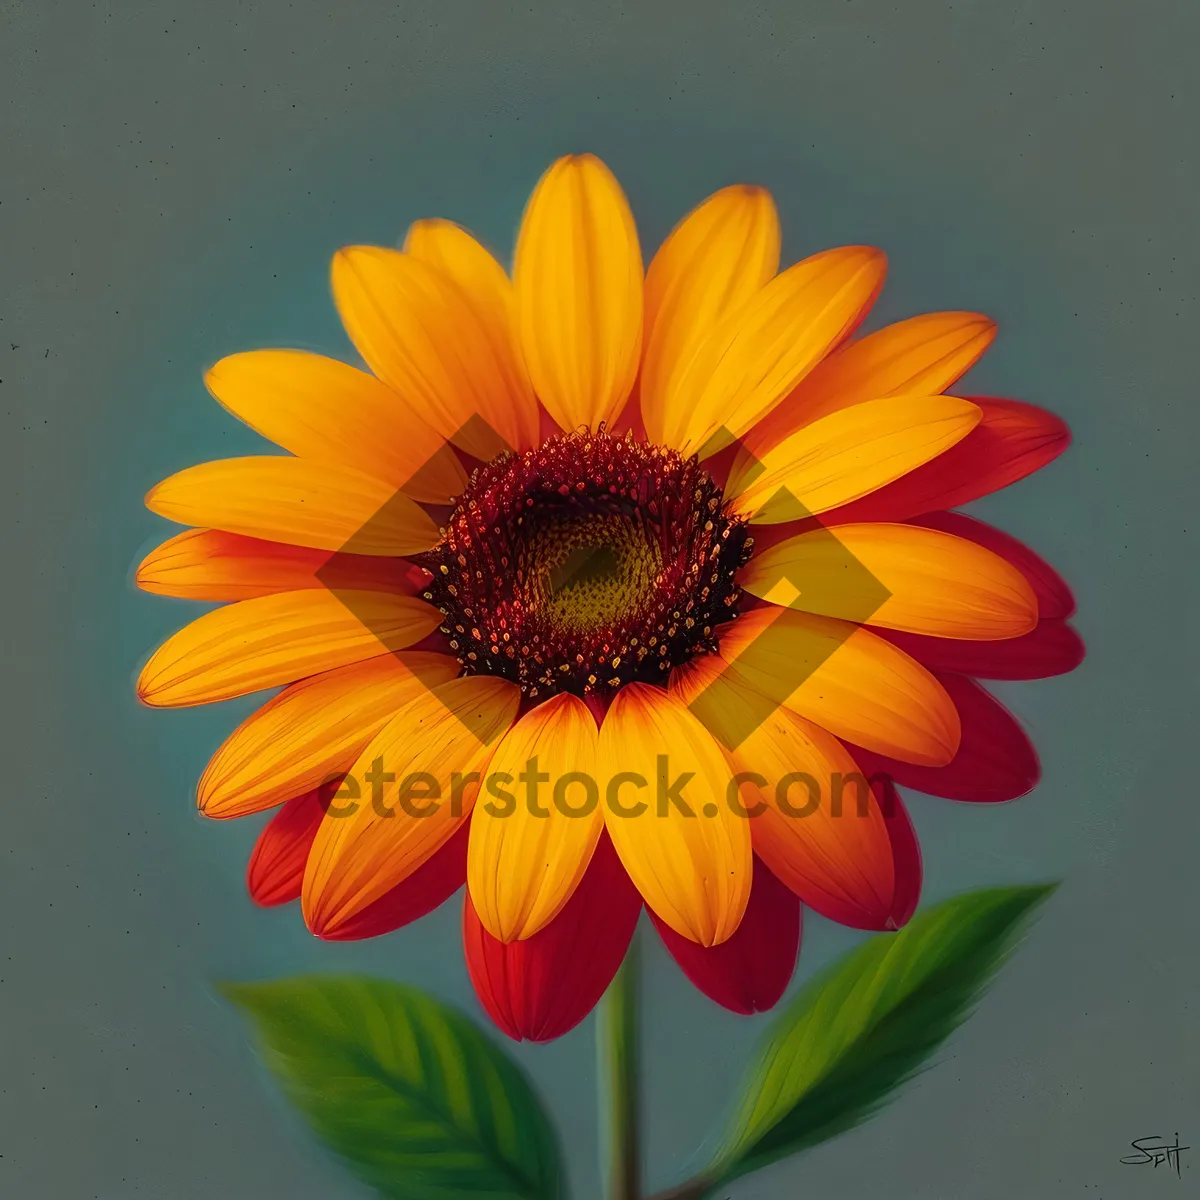 Picture of Vibrant Sunflower Blooming in Sunny Garden